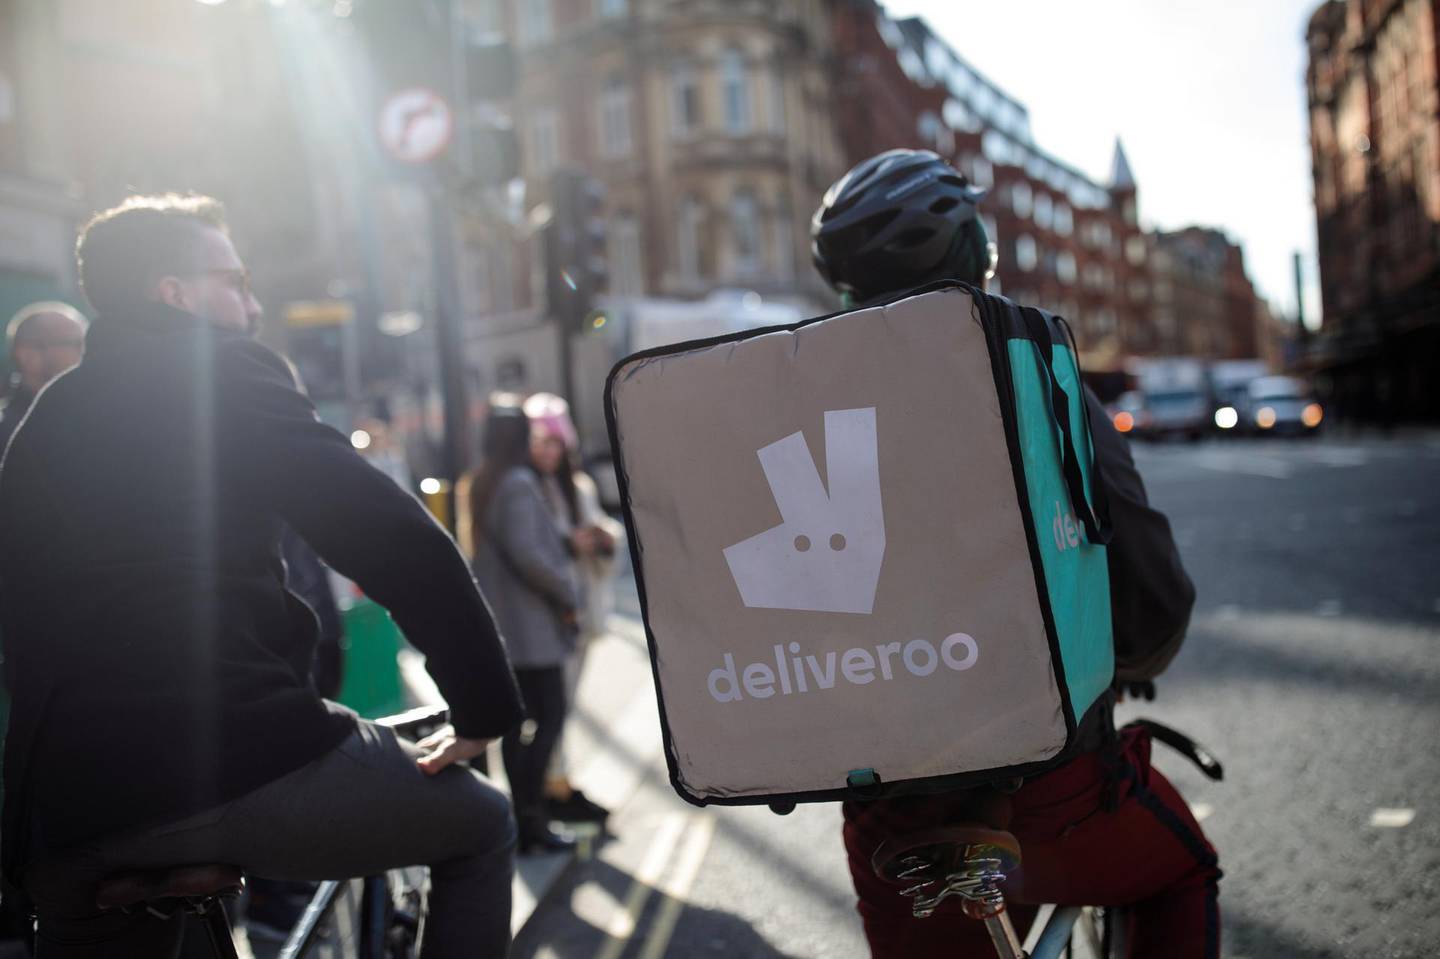 LONDON, ENGLAND - FEBRUARY 16: A Deliveroo rider cycles through central London on February 16, 2018 in London, England. Millions of part-time and flexible workers in the so-called gig economy are to receive new rights including sick and holiday pay under a new government reform. (Photo by Jack Taylor/Getty Images)